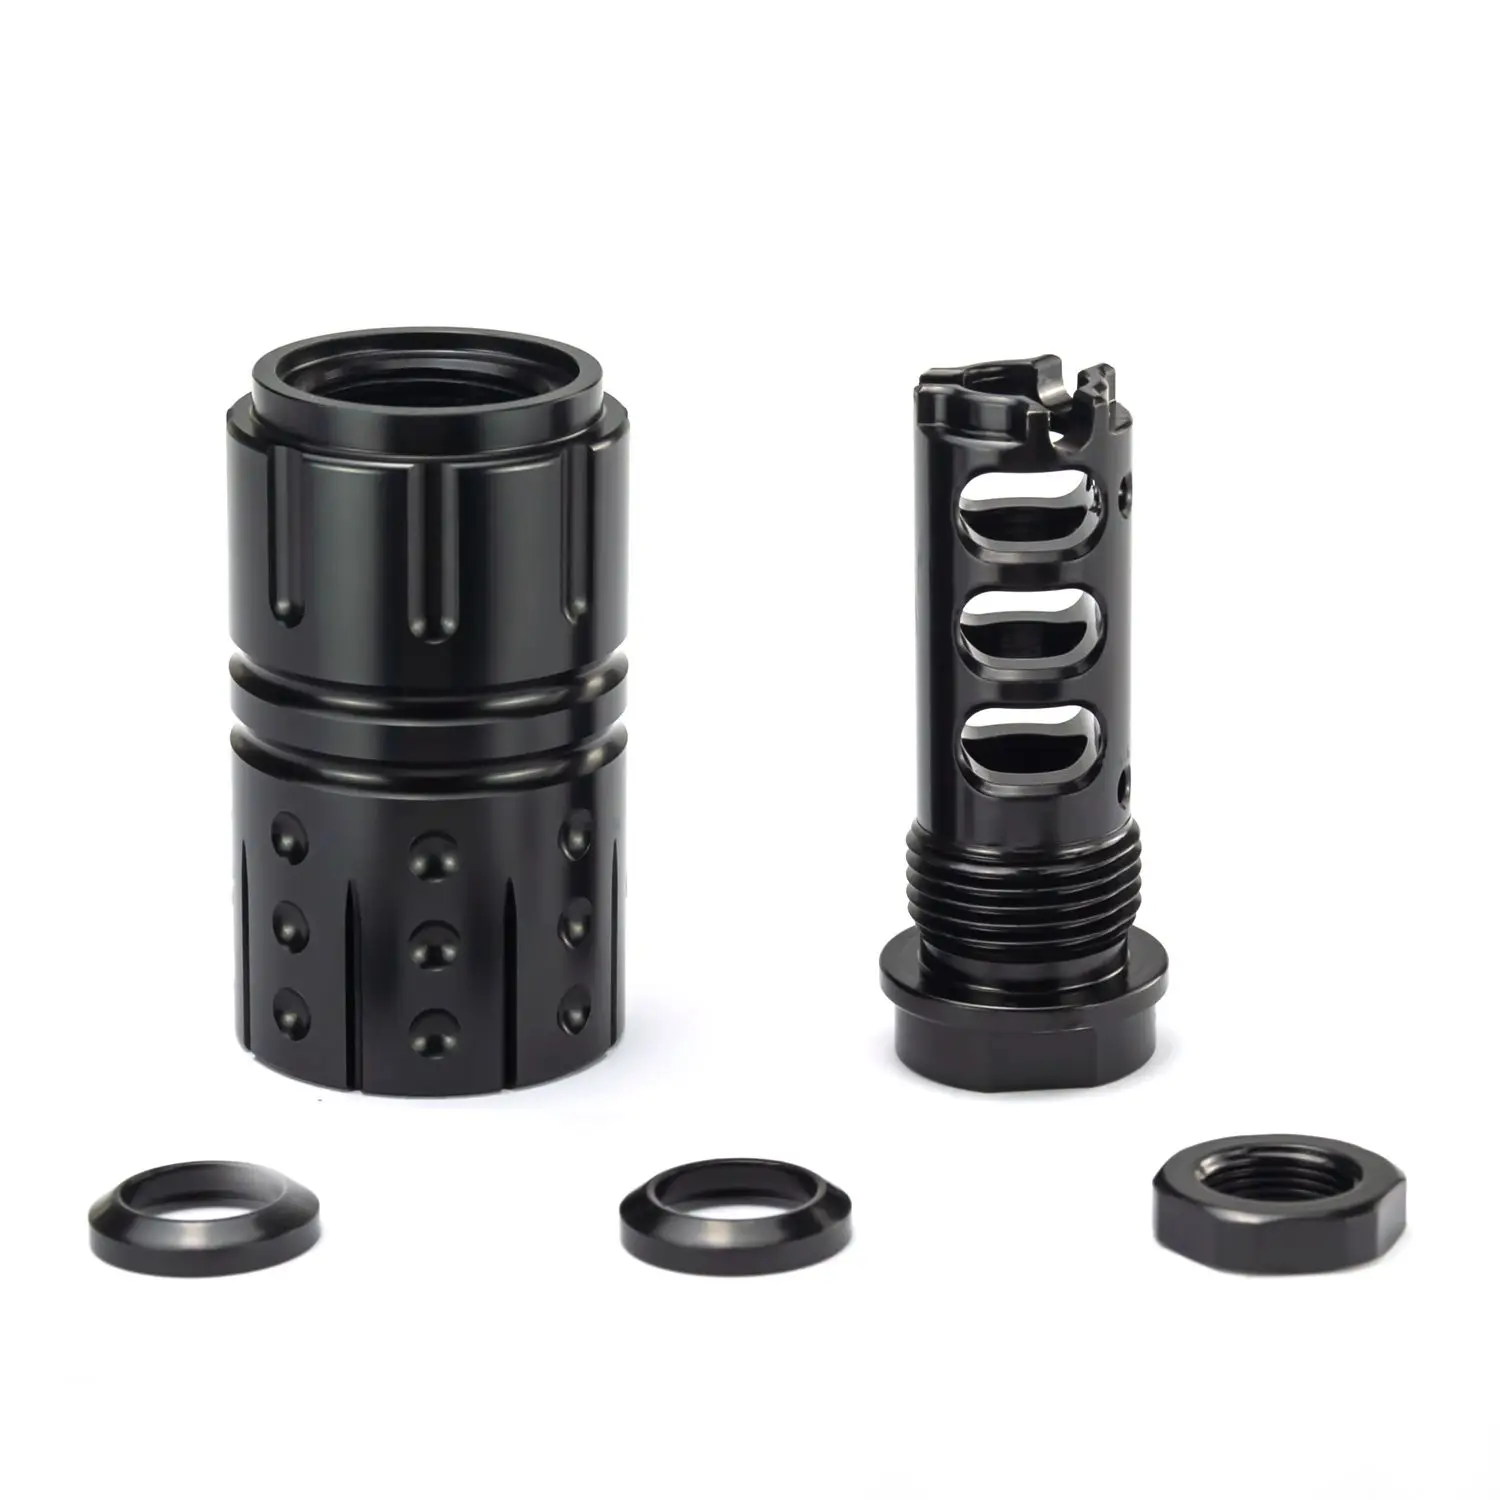 

CNC 5/8-24 to 13/16-16 Muzzle Flash Brake Adapter Stainless Steel Outer Sleeve With Washer + Nut .308 Compensator .45 ACP